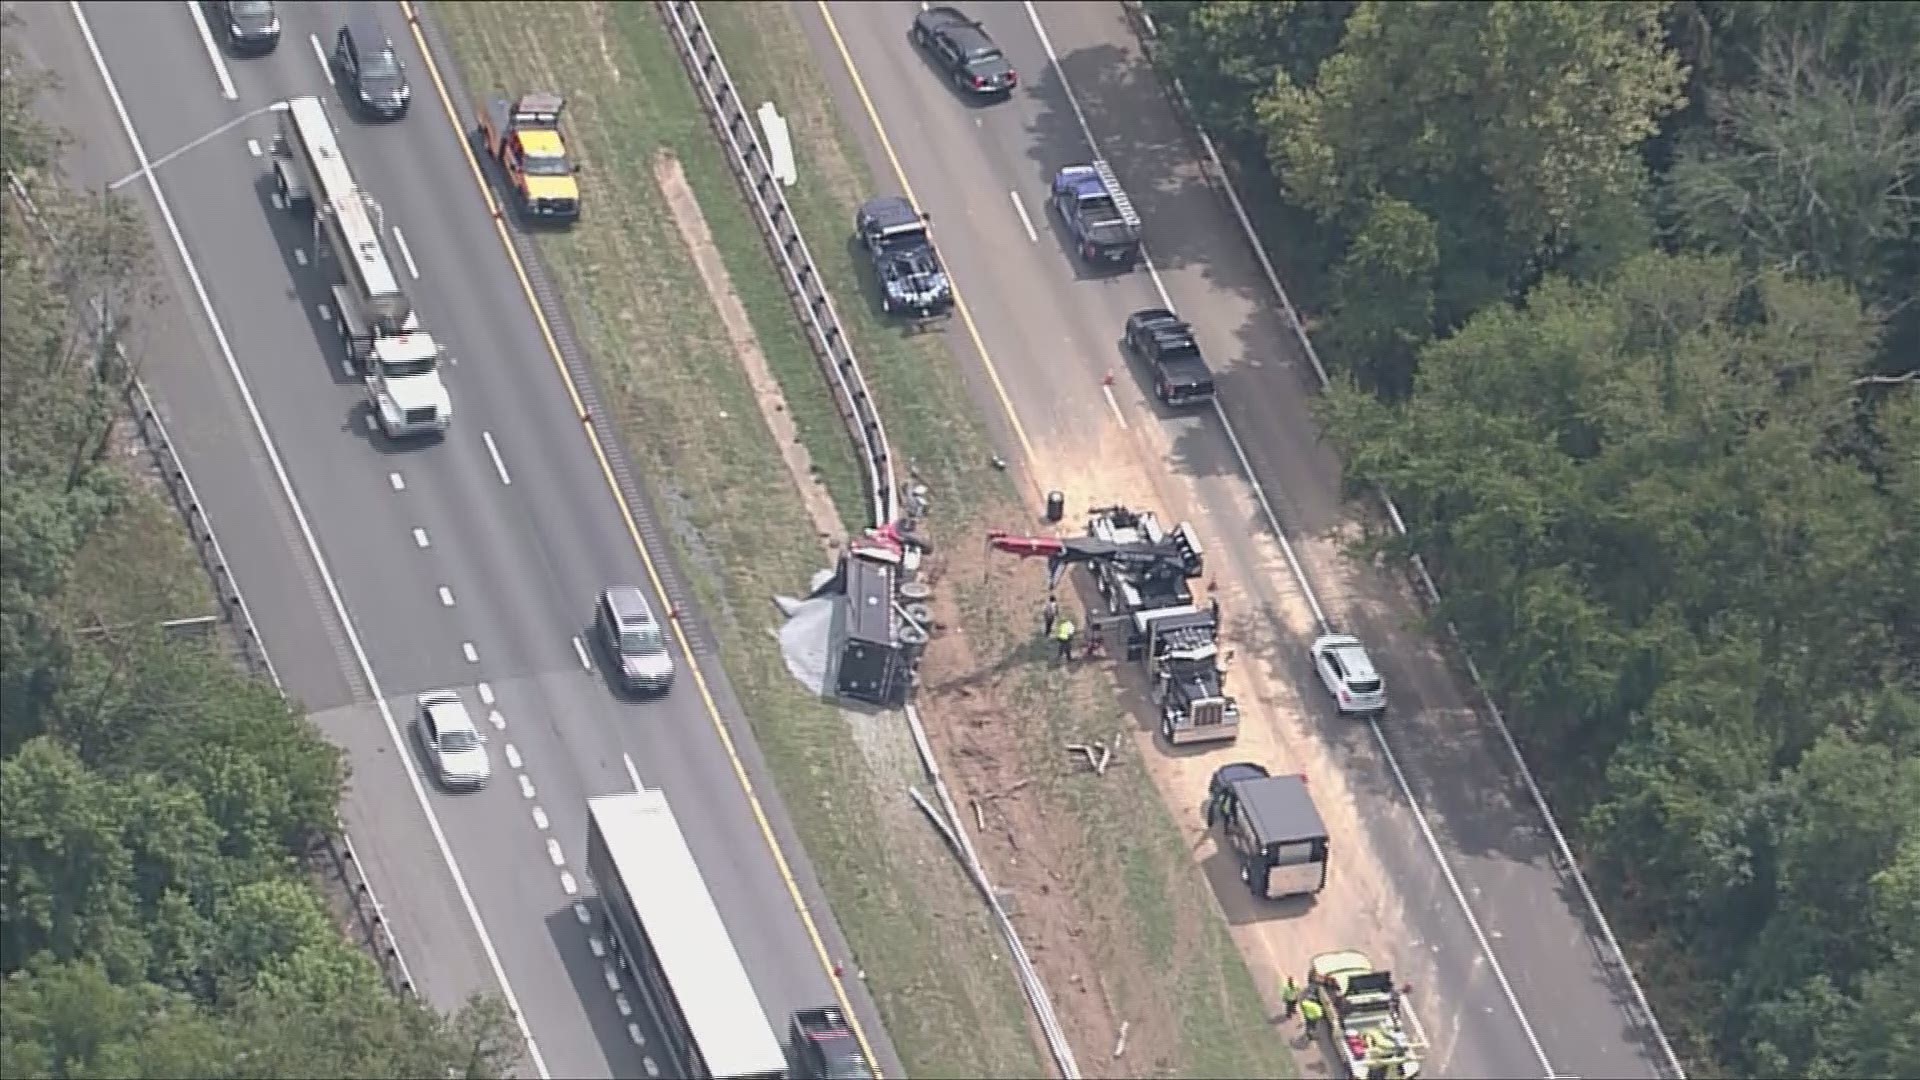 A dump trucked carrying stone overturned onto a median on Interstate 270 near Frederick, Md. Traffic is backed up for miles.